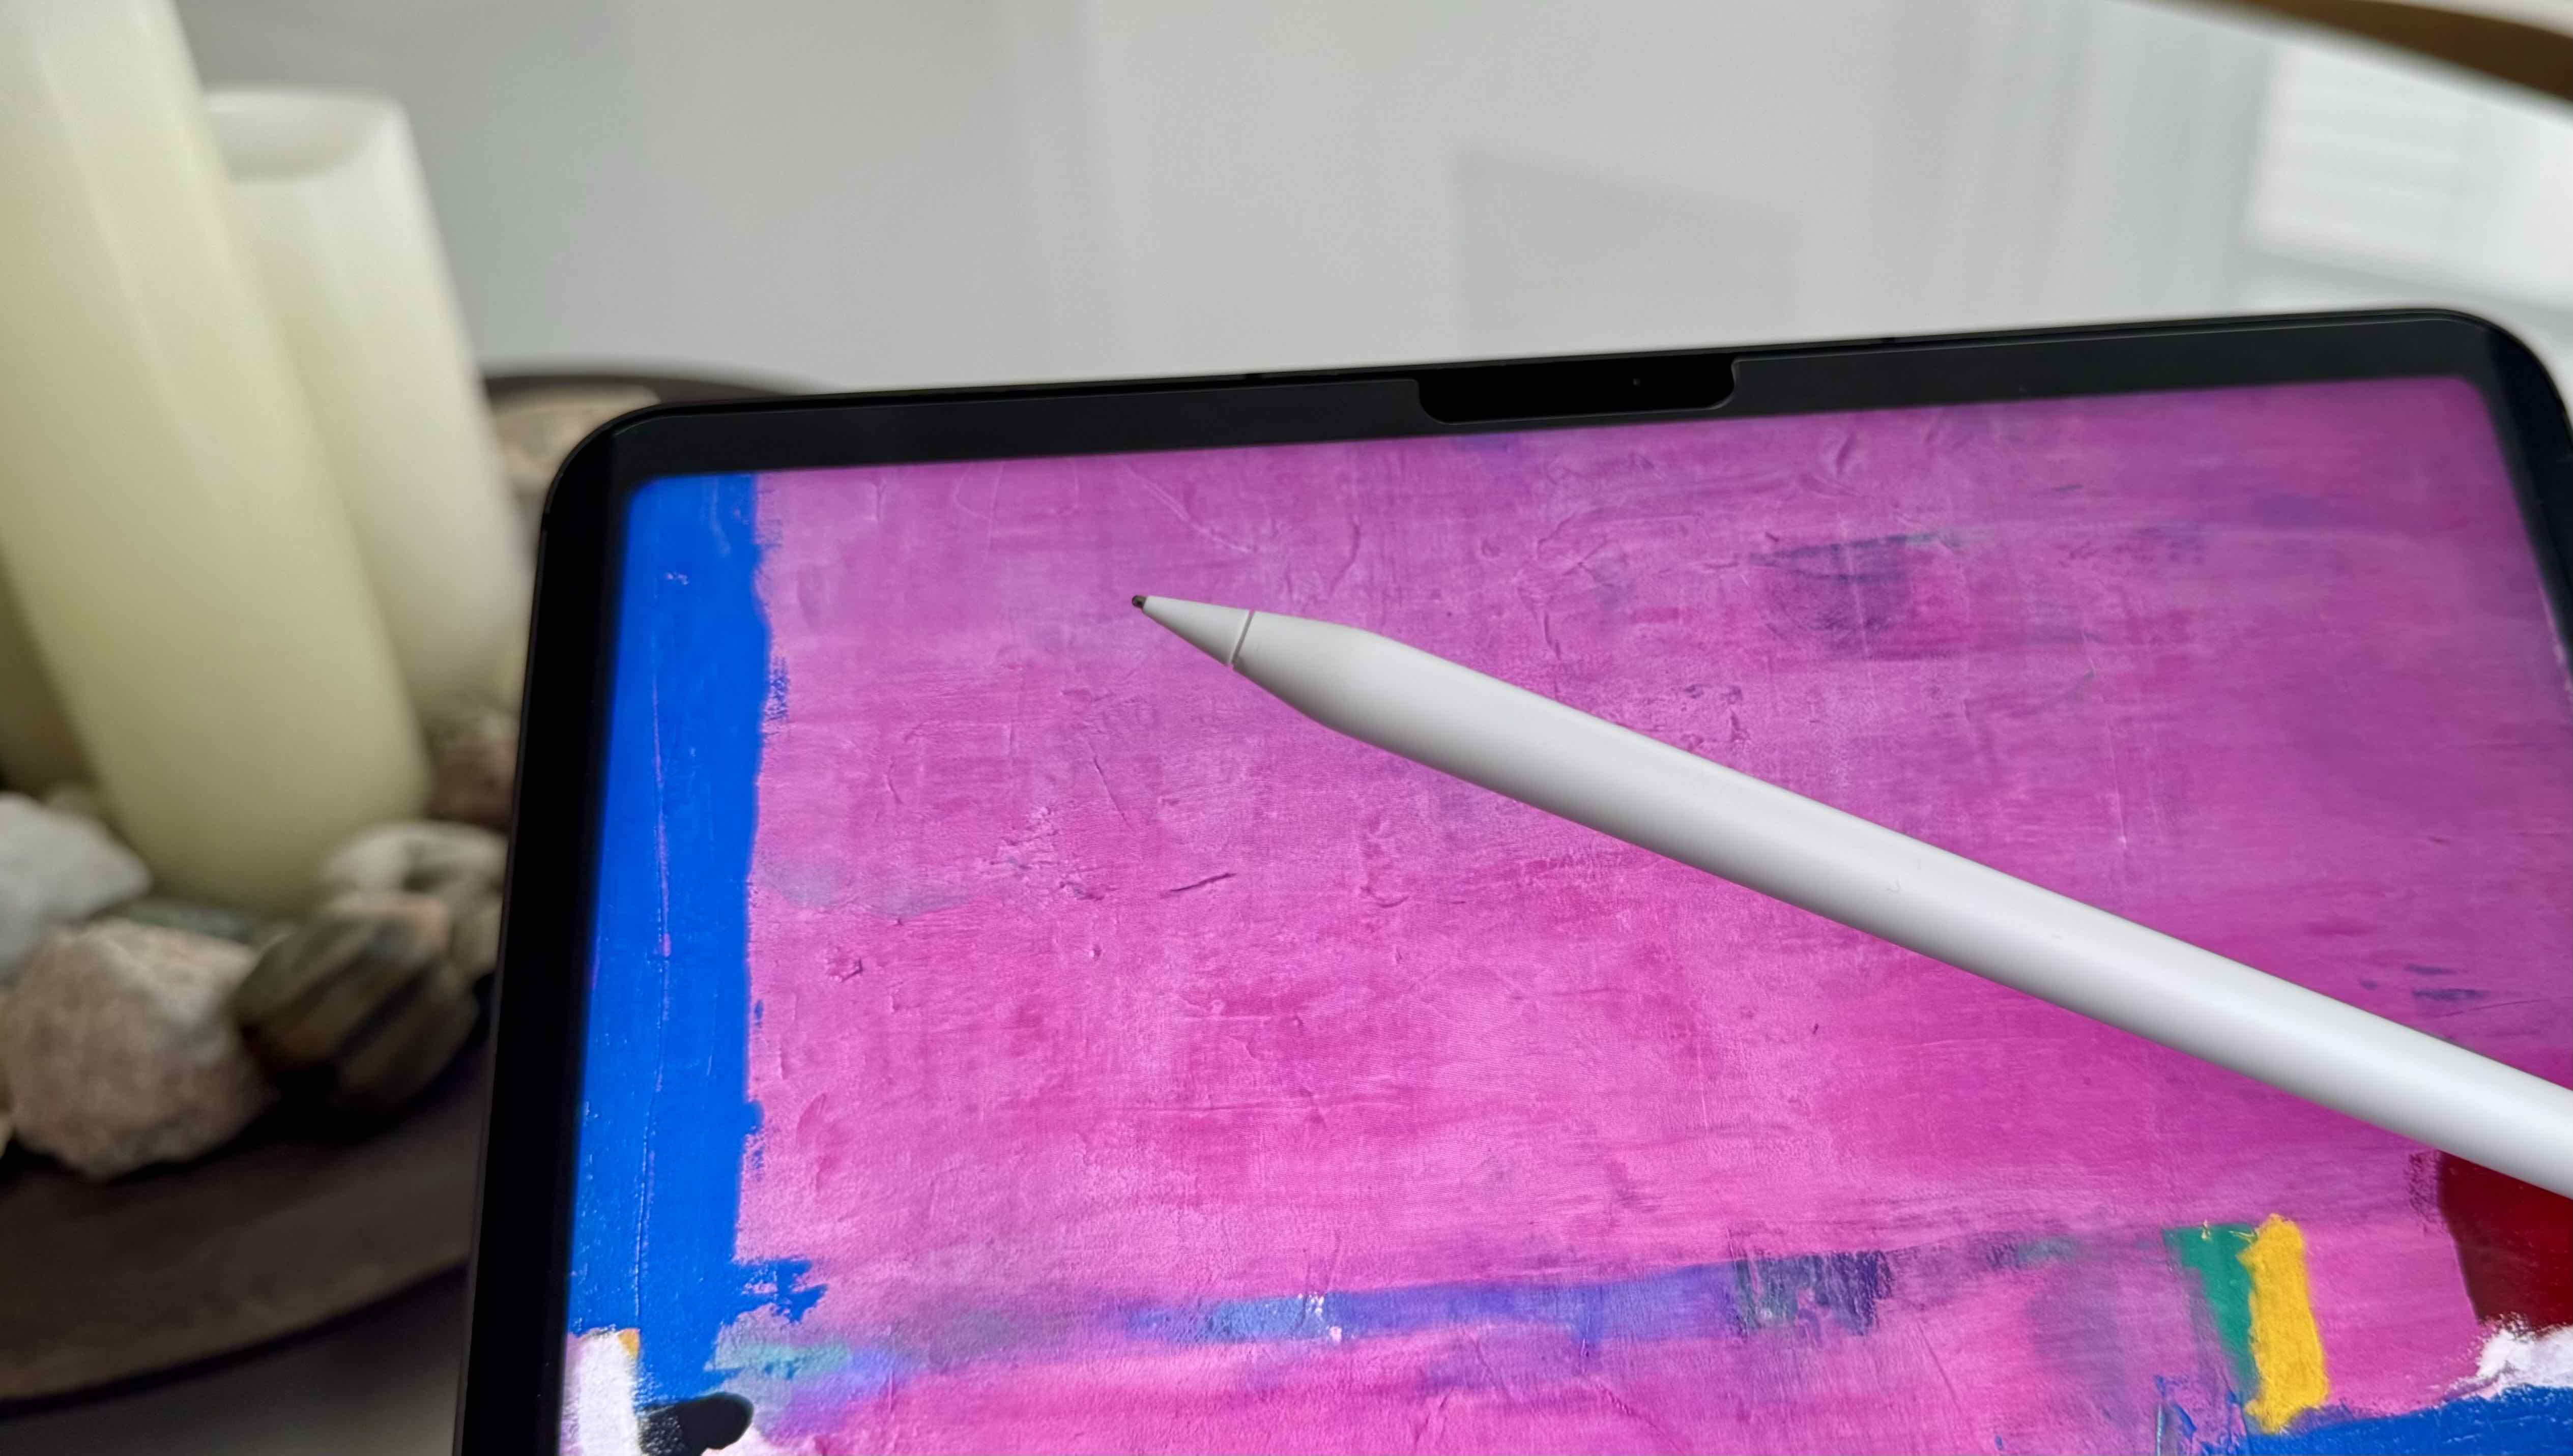 How to Charge an Apple Pencil (1st Gen) - Astropad